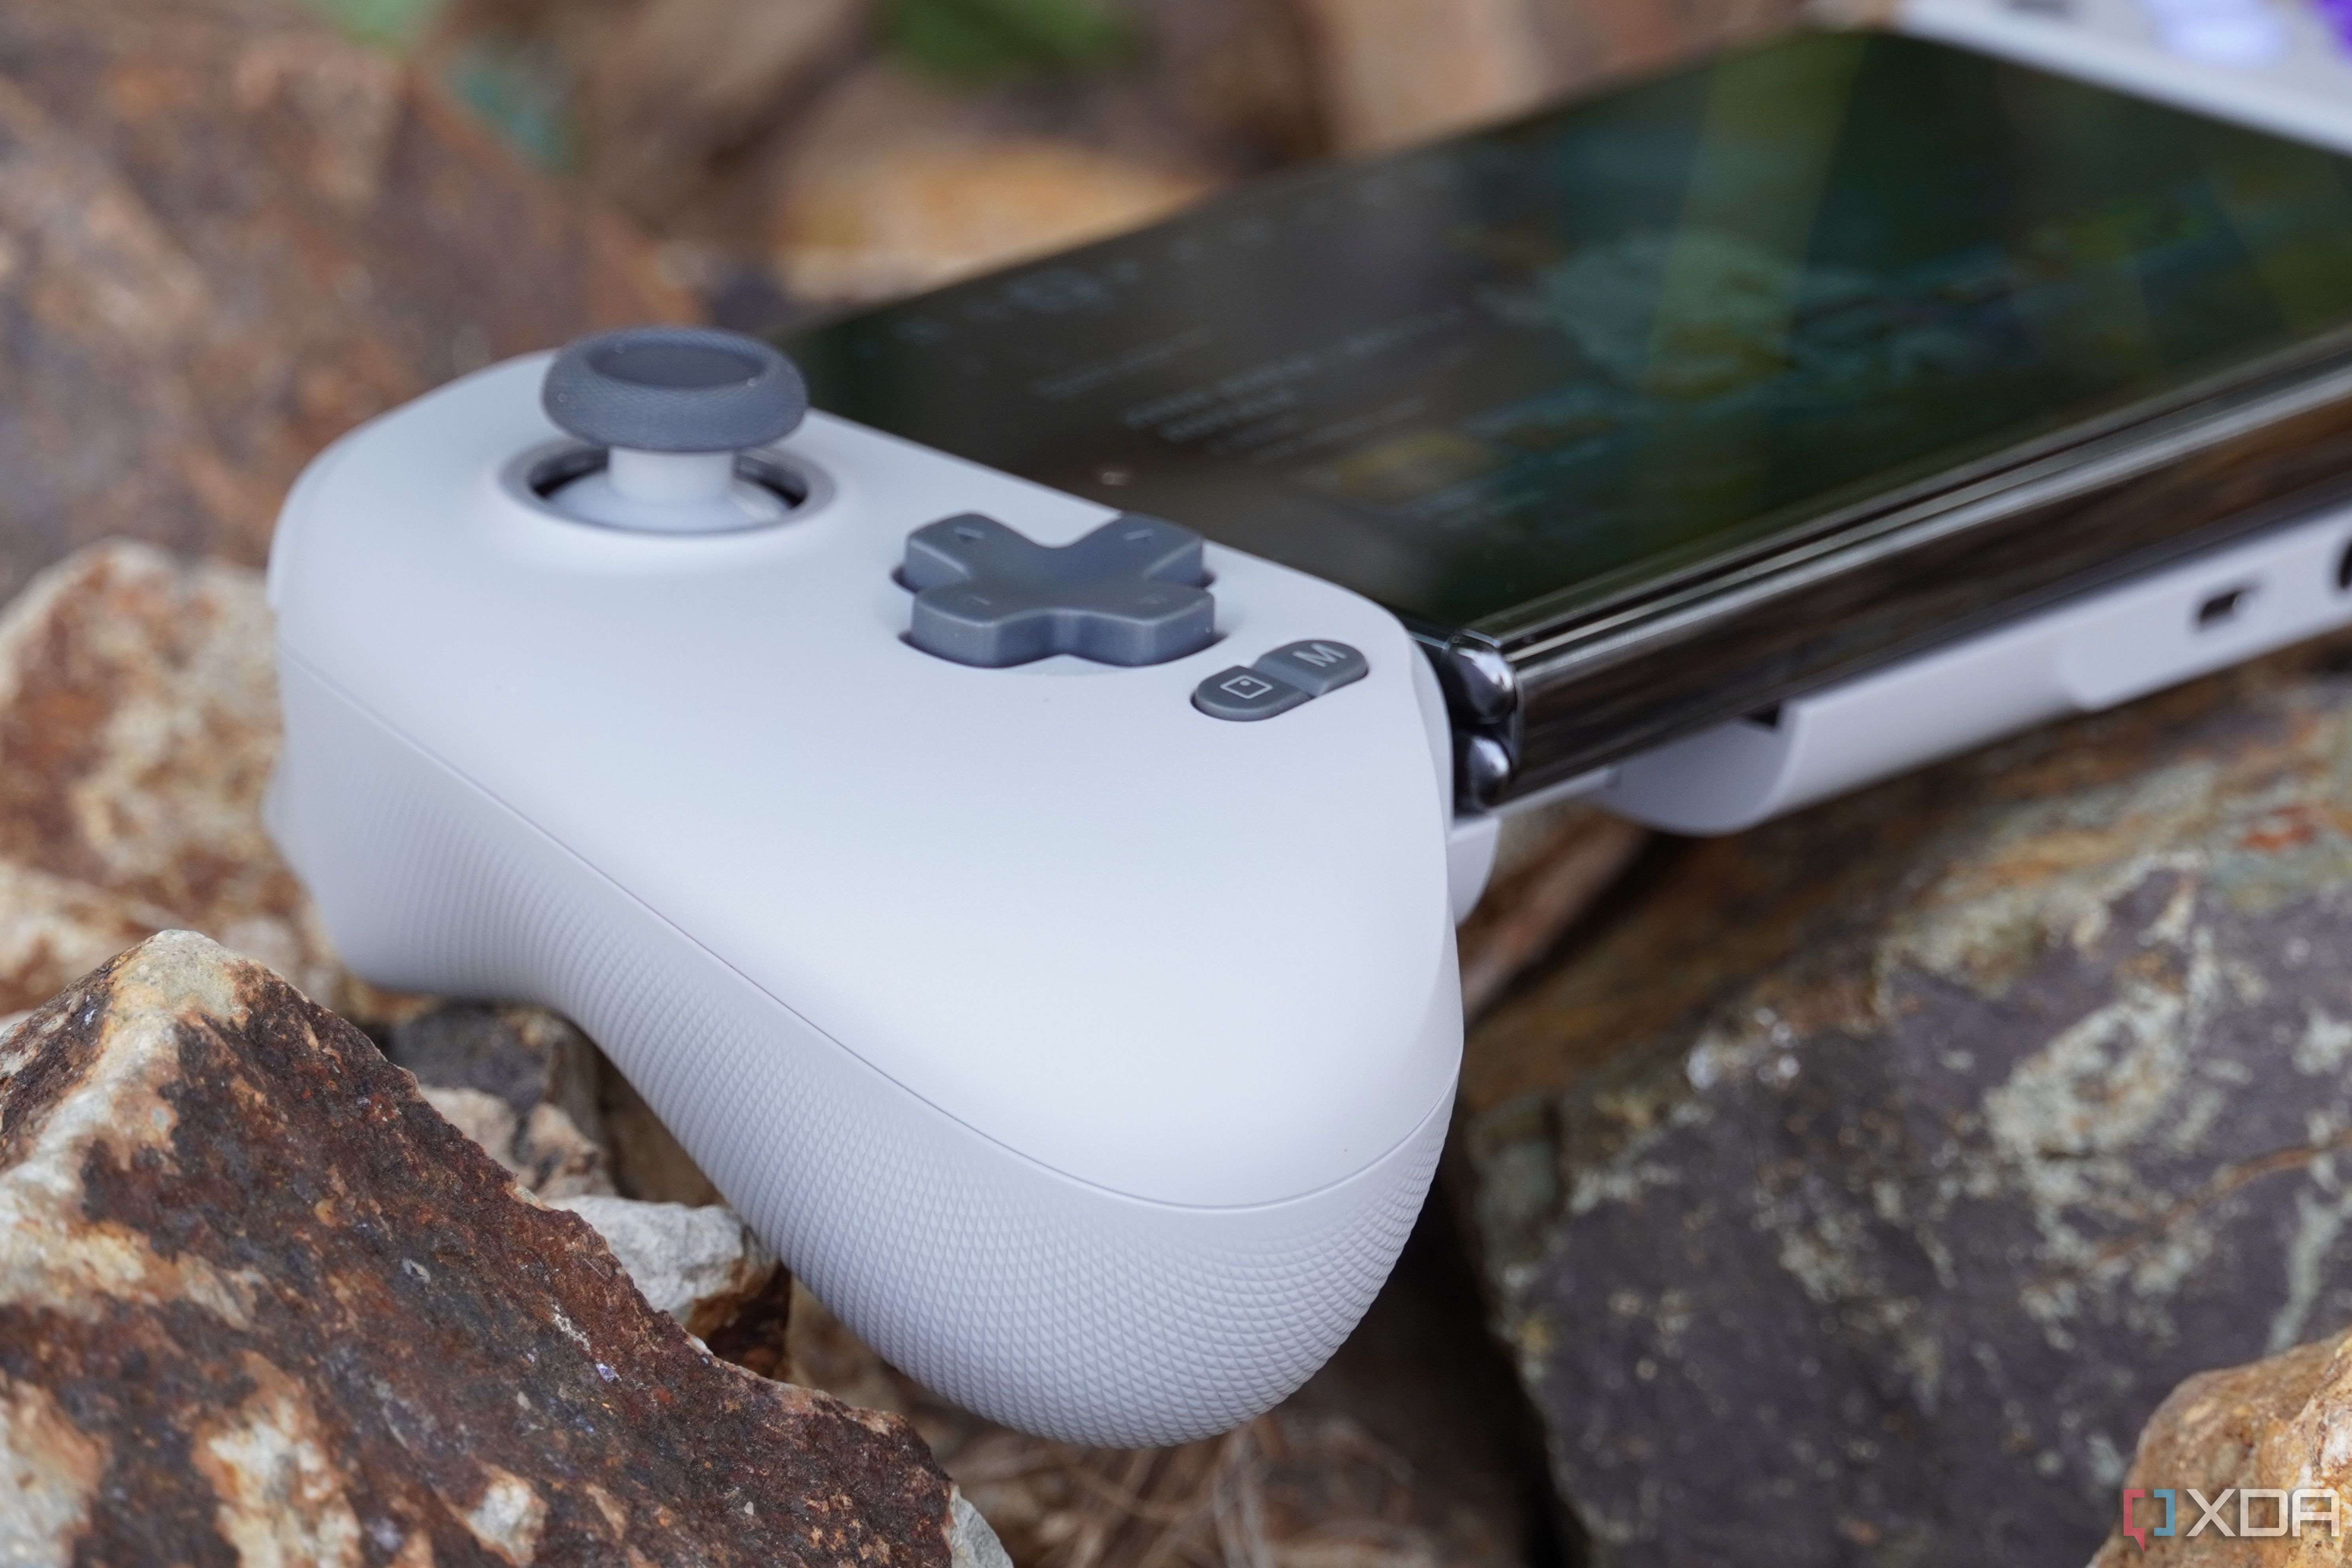 GameSir G8 Galileo Review: The mobile controller I've dreamed of